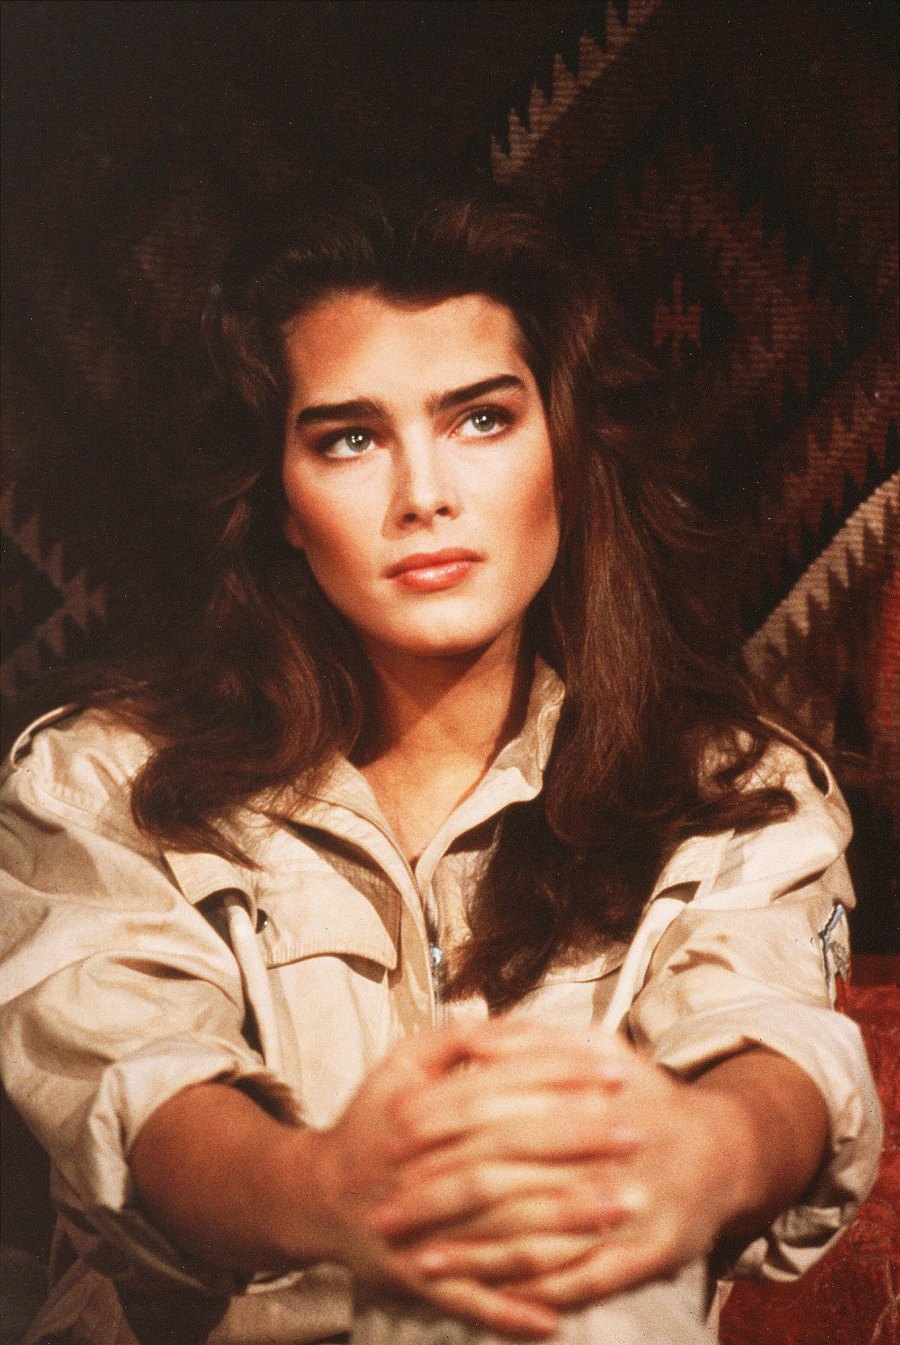 Brooke Shields Describes Alleged Sexual Assault in Documentary